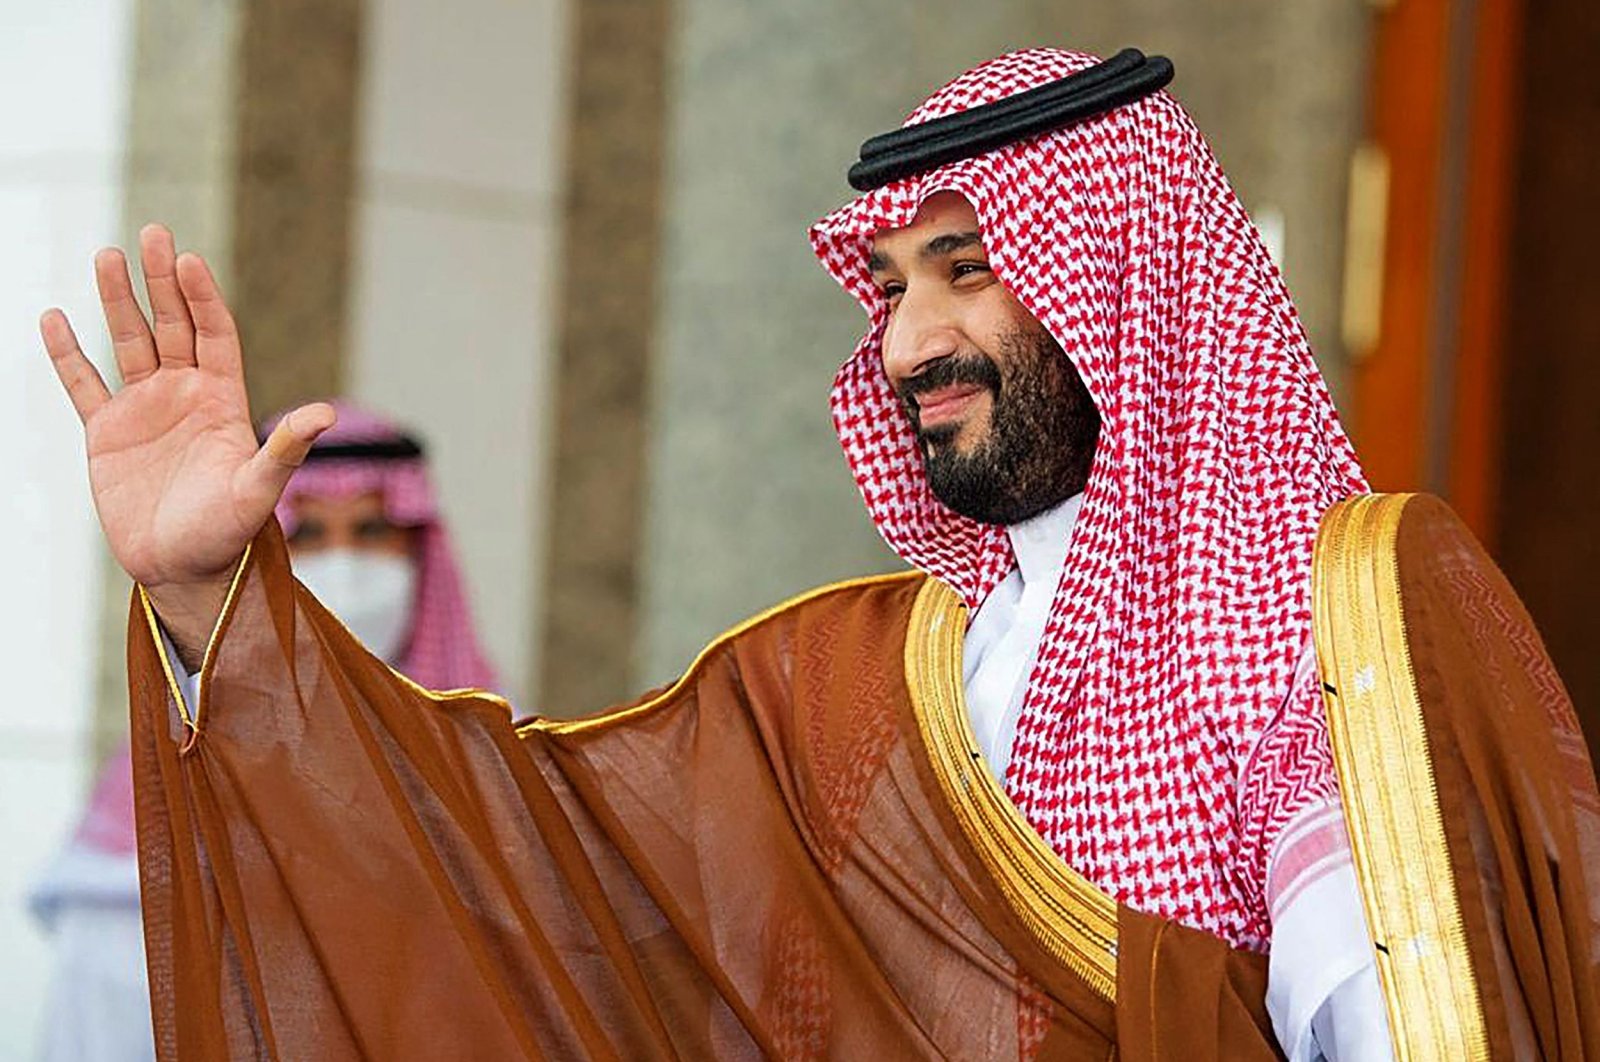 Saudi Crown Prince Mohammed bin Salman gestures as he receives the French president in the Red Sea coastal city of Jiddah, Saudi Arabia in this file handout photo provided by the Saudi Royal Palace on Dec. 4, 2021. (AFP Photo)